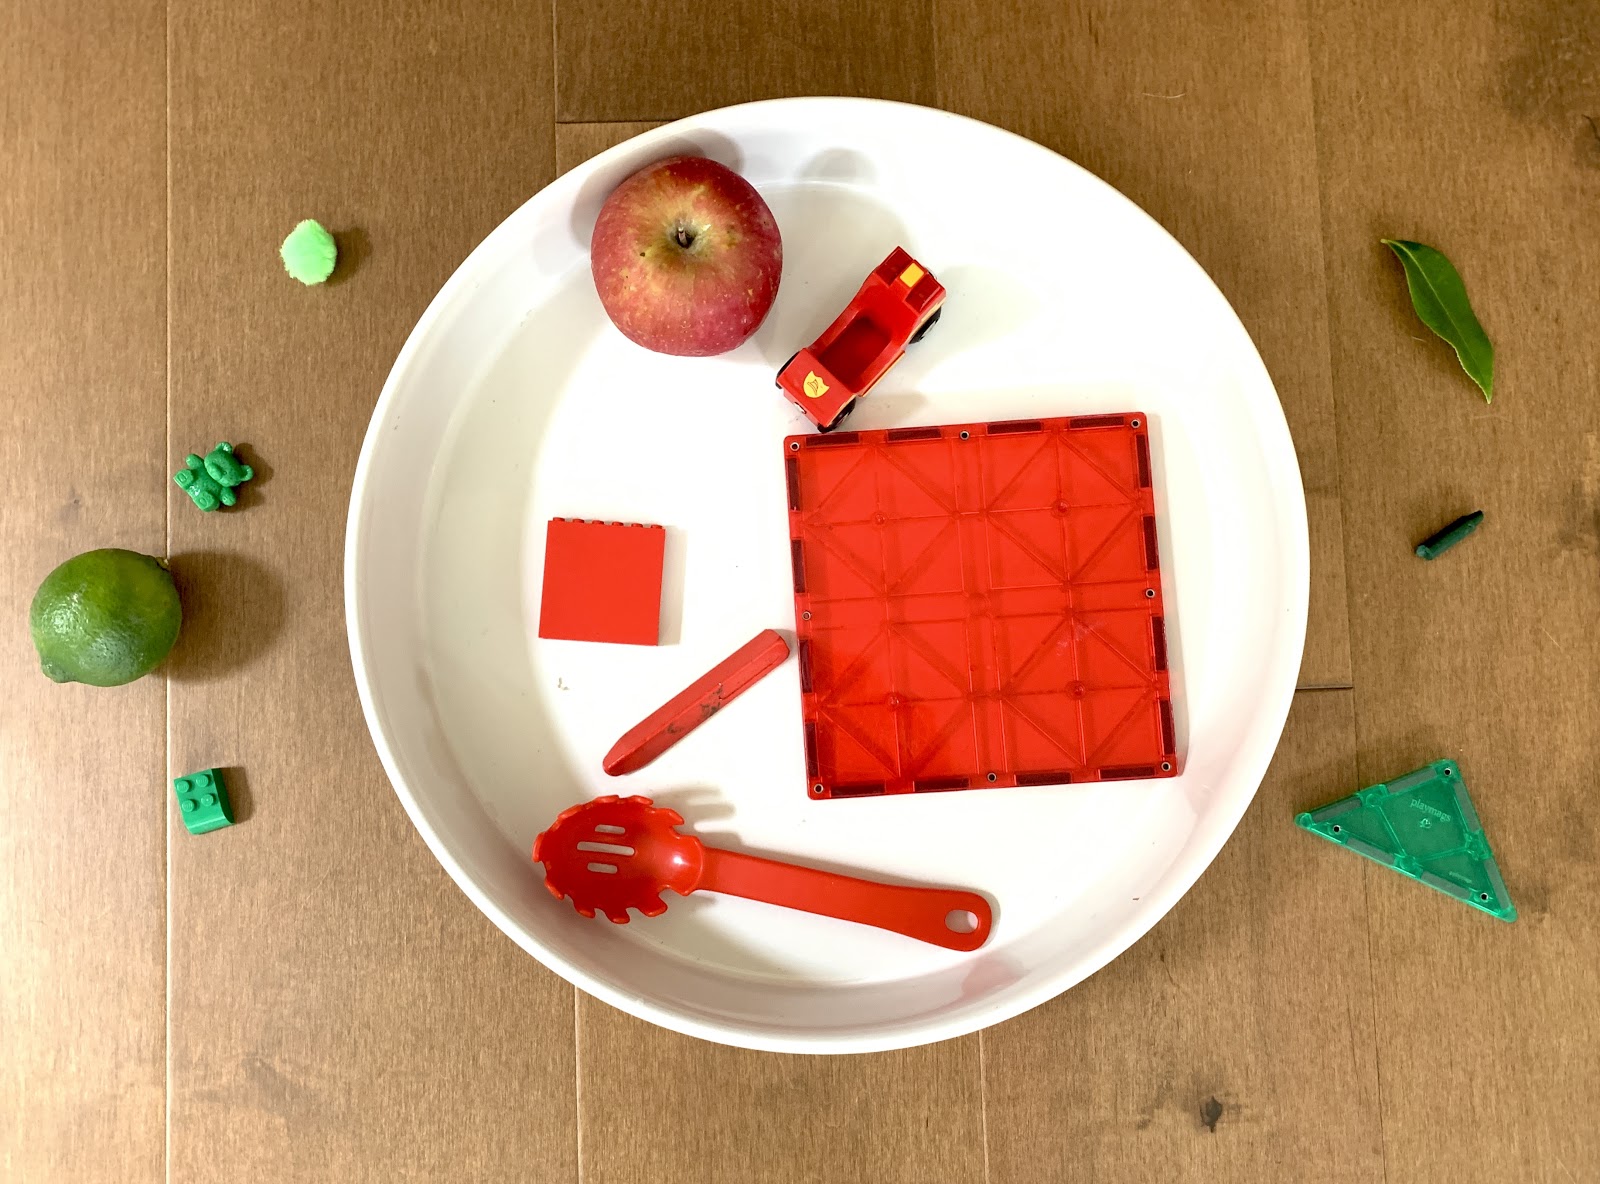 A white plate with a number of red objects on it; green objects sit outside the plate.